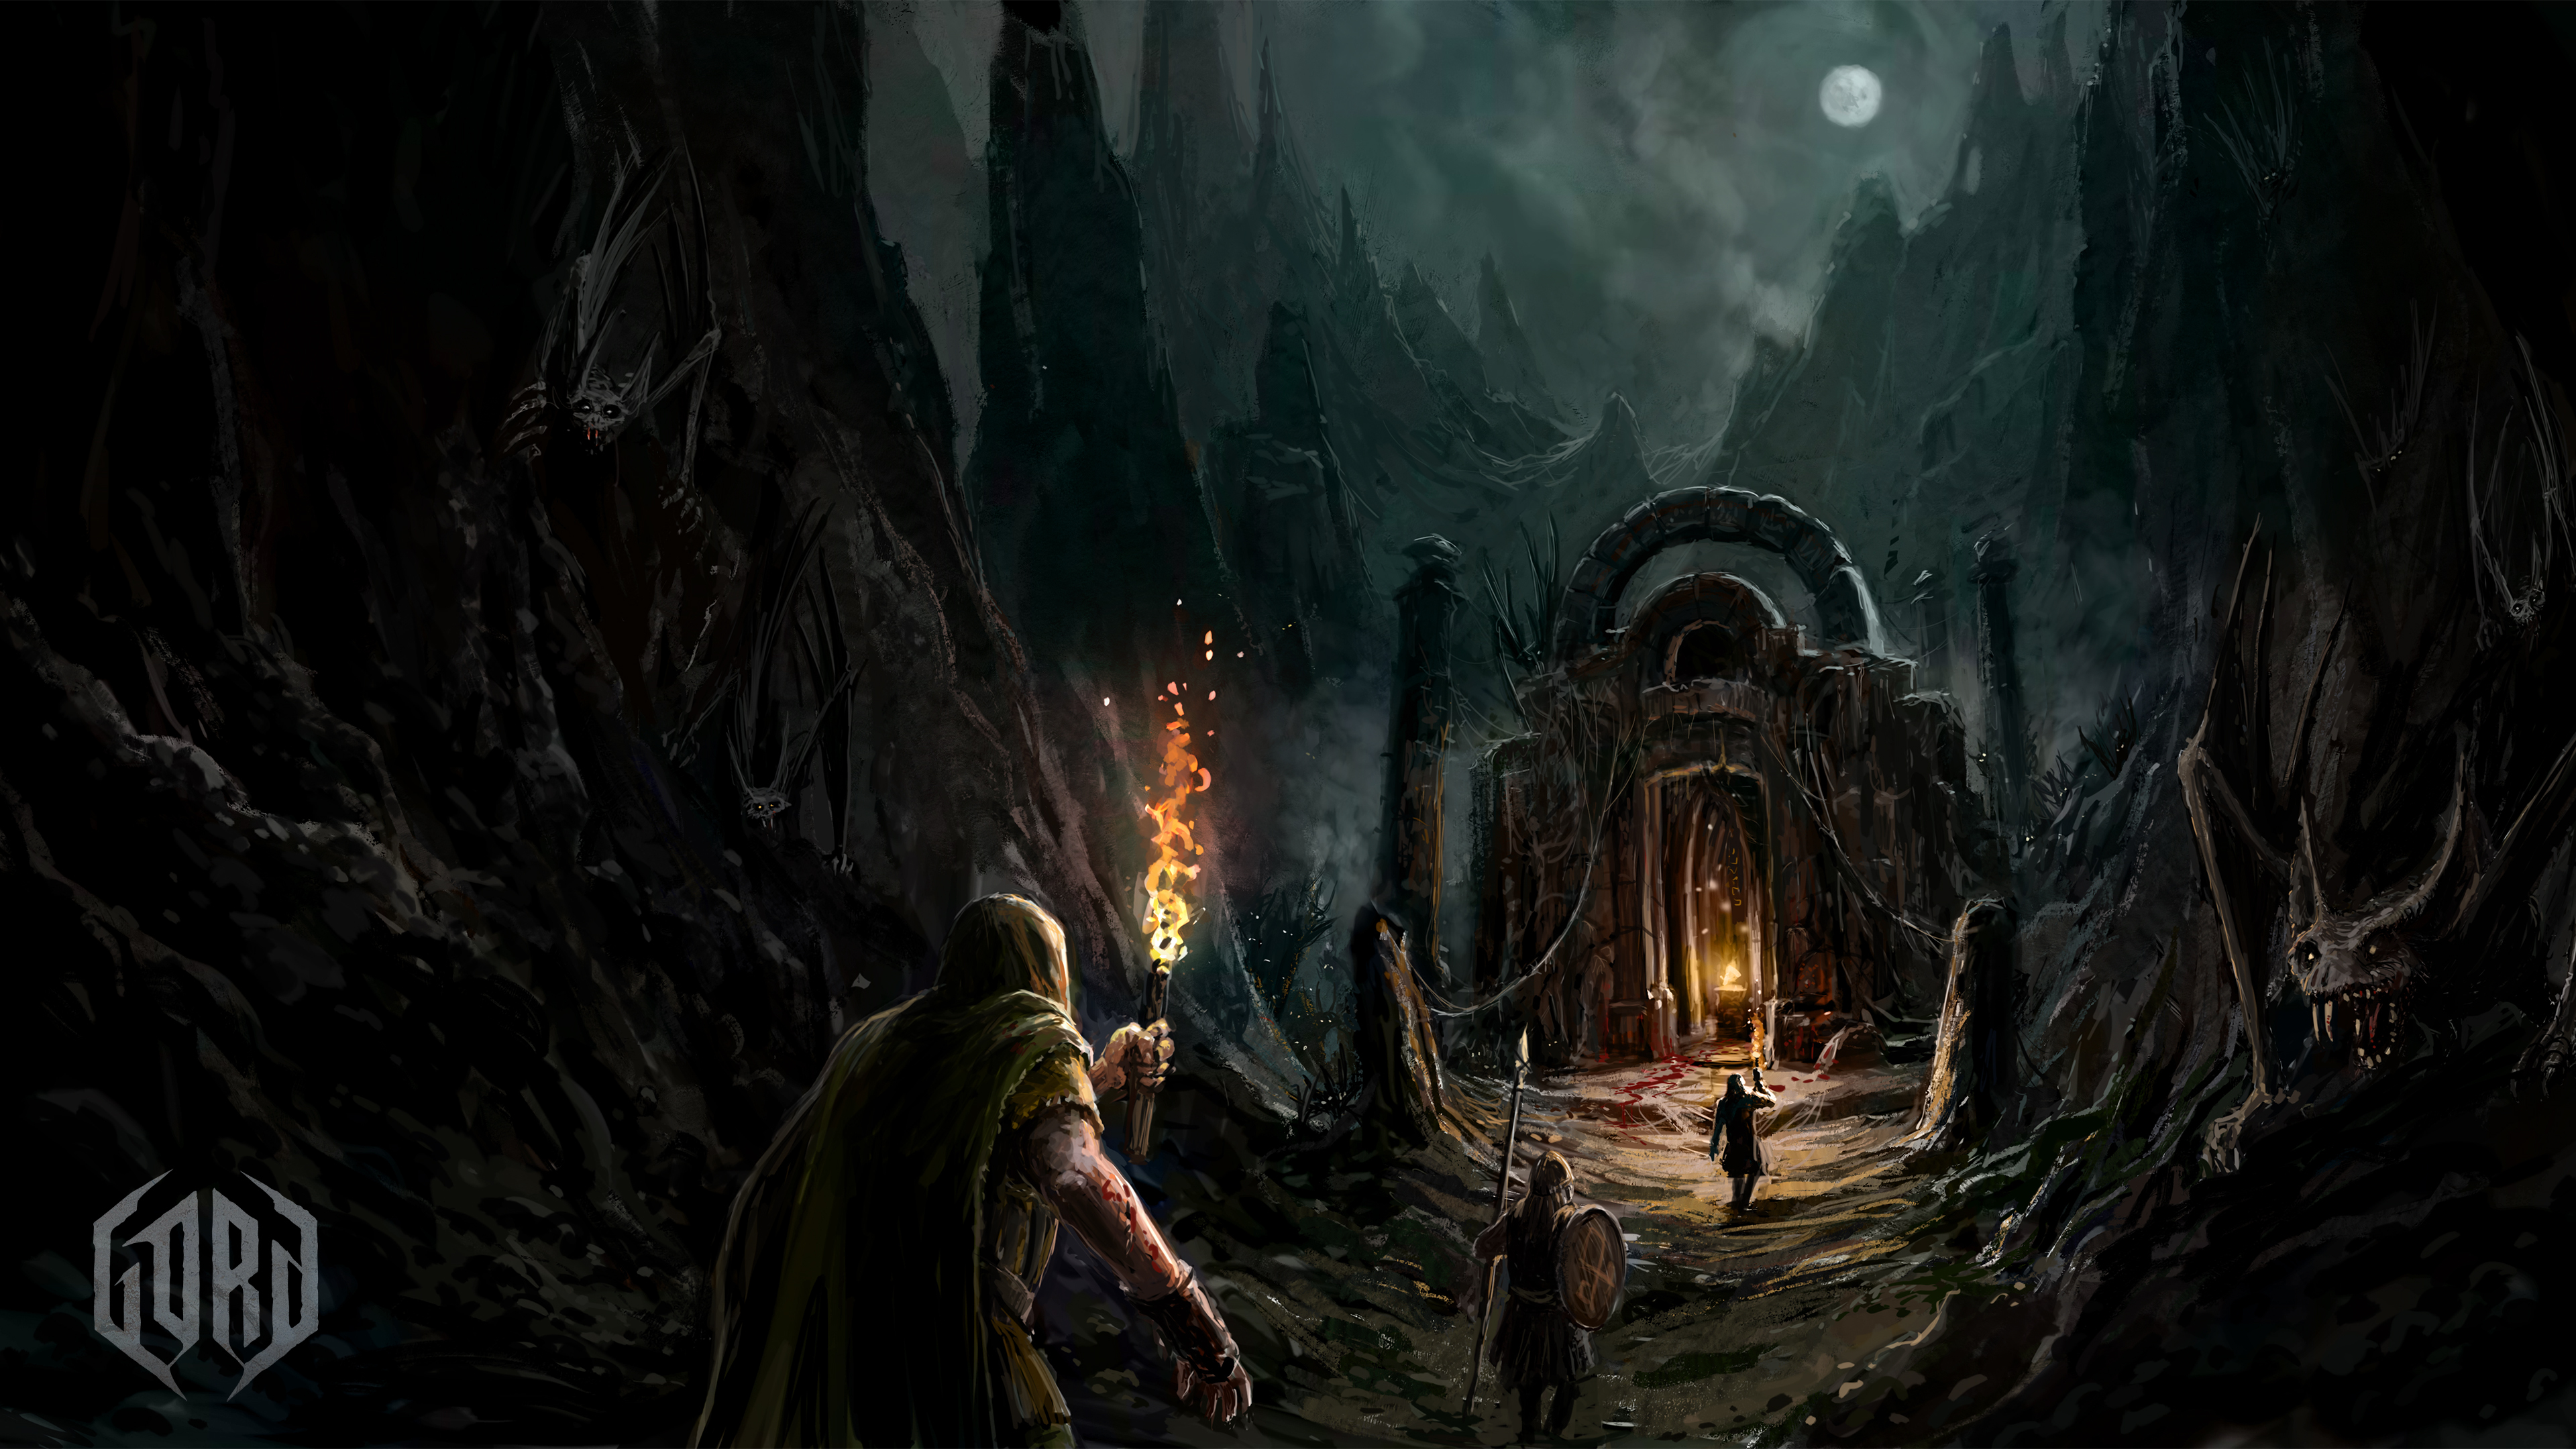 Artwork from Gord, featuring characters holding torches and spears heading toward a gated entrance